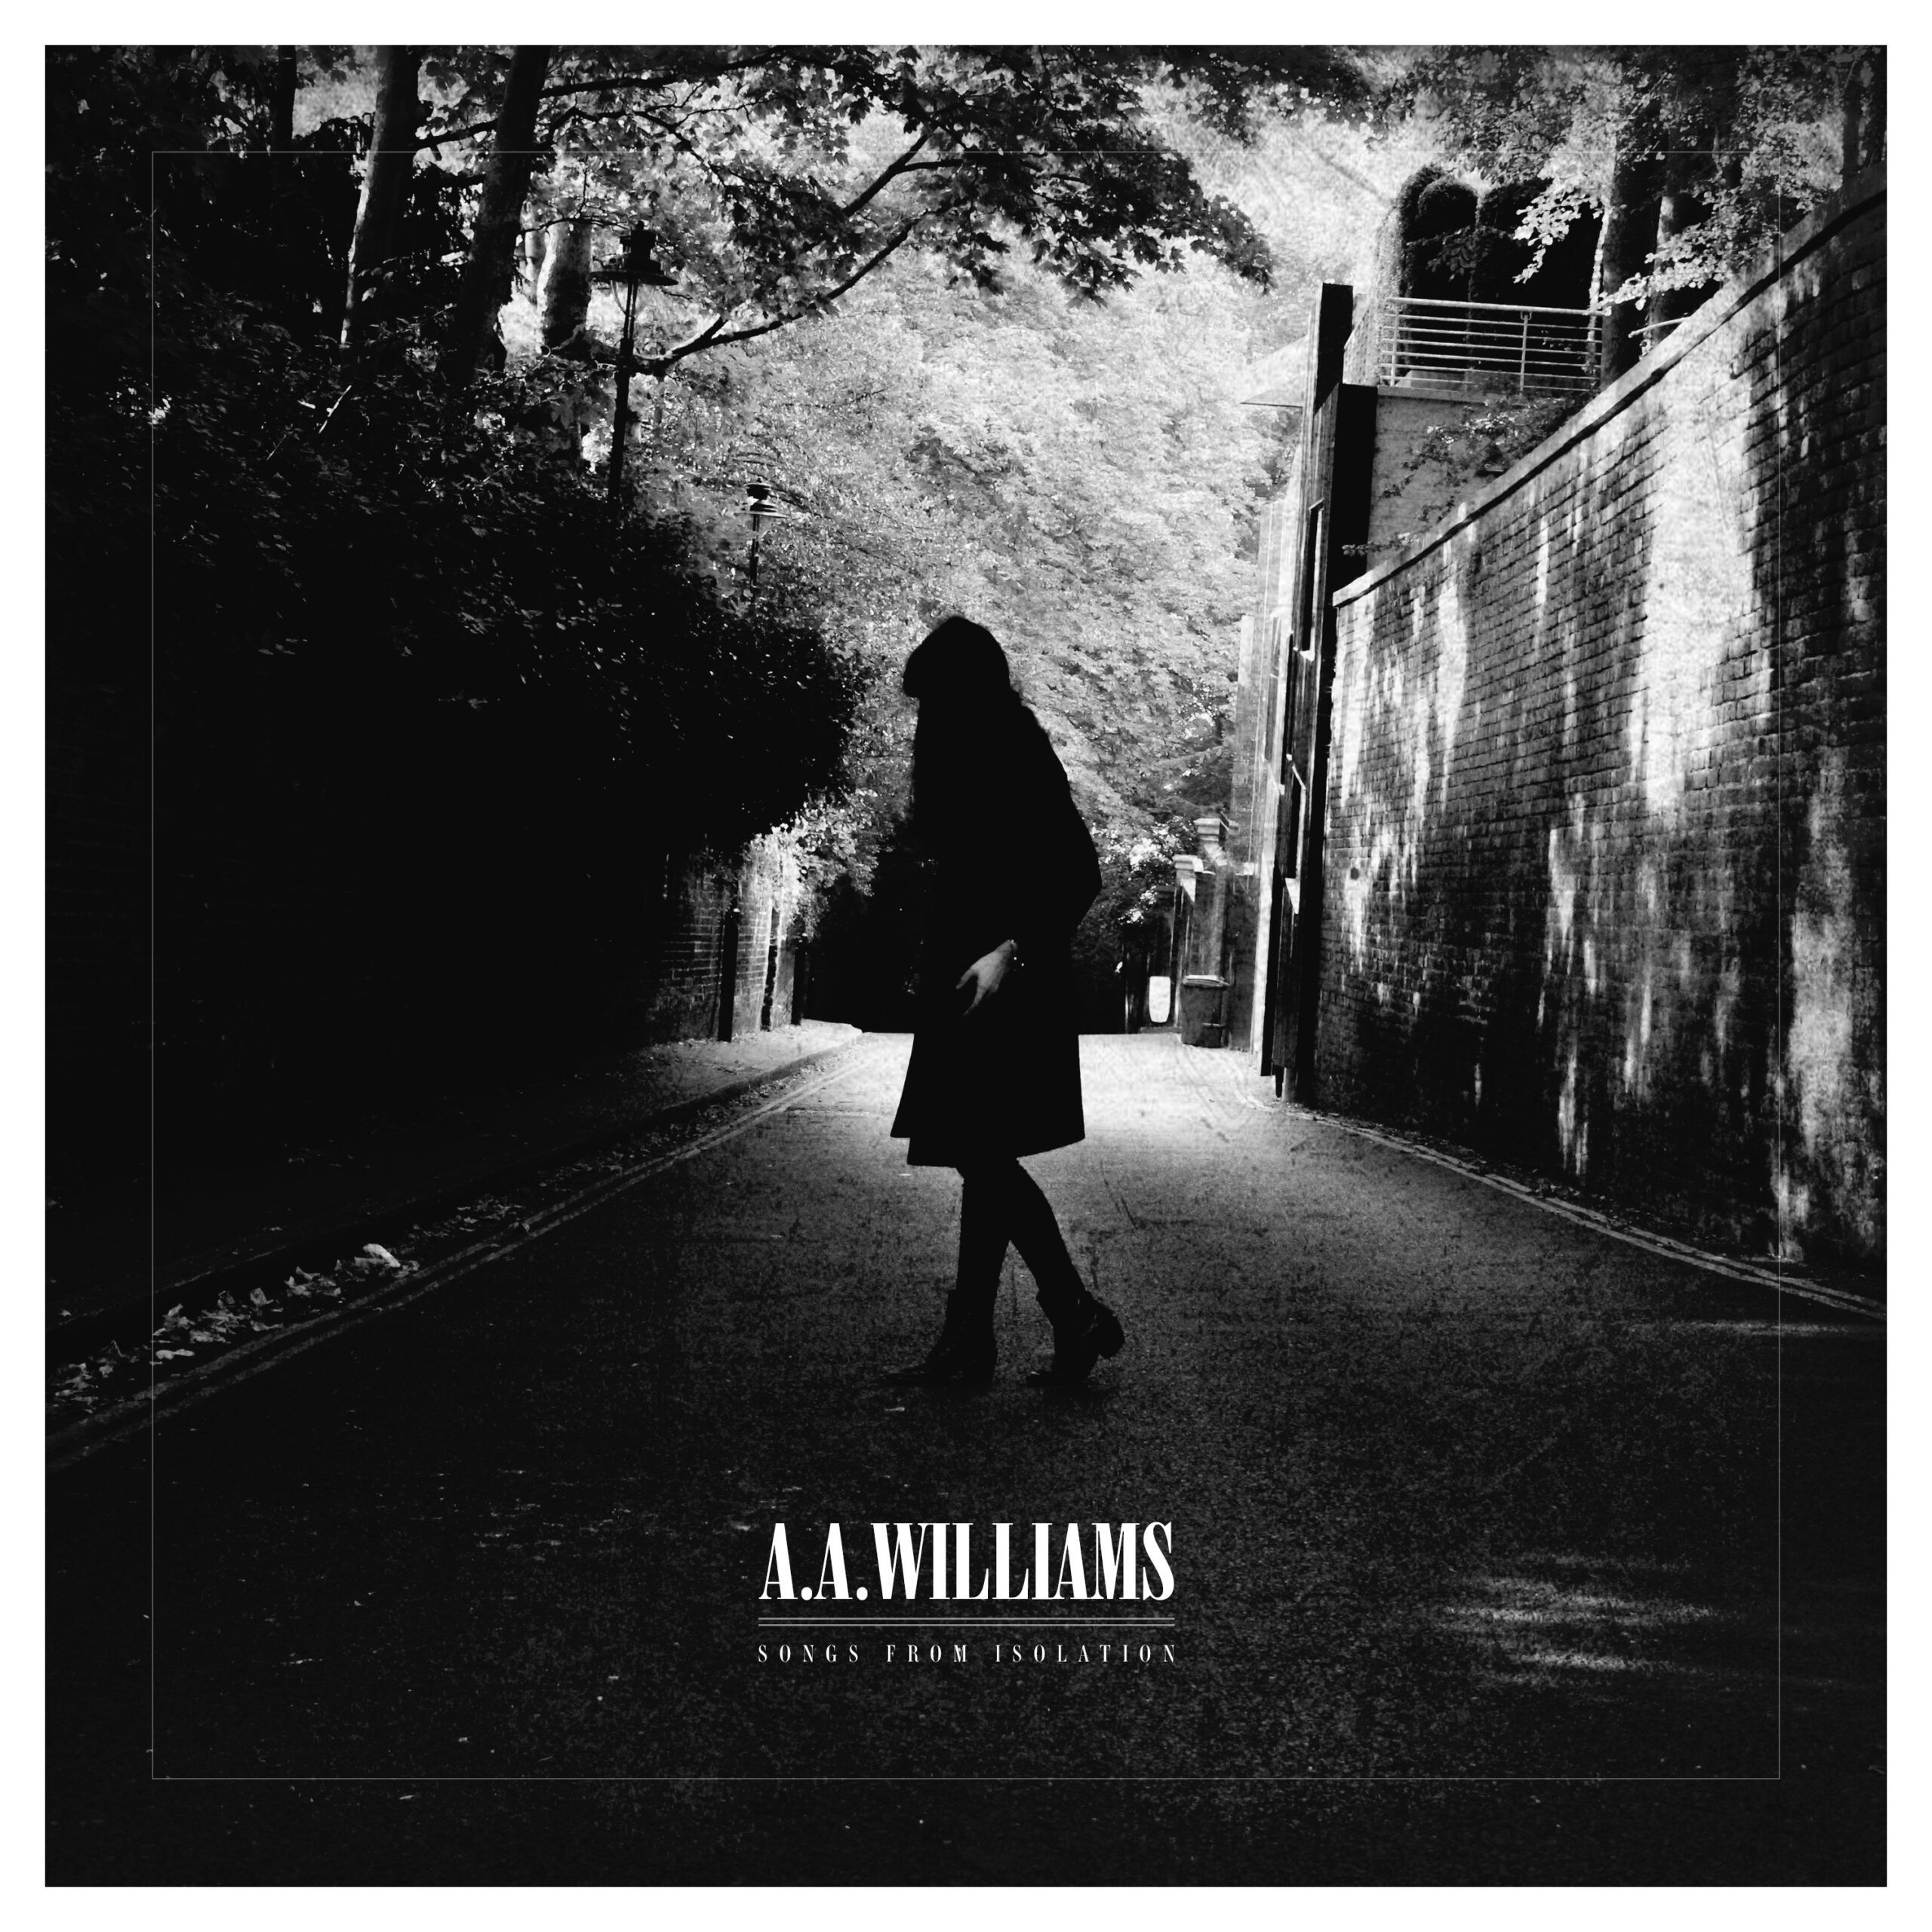 A.A. Williams - Songs From Isolation (Album Cover))